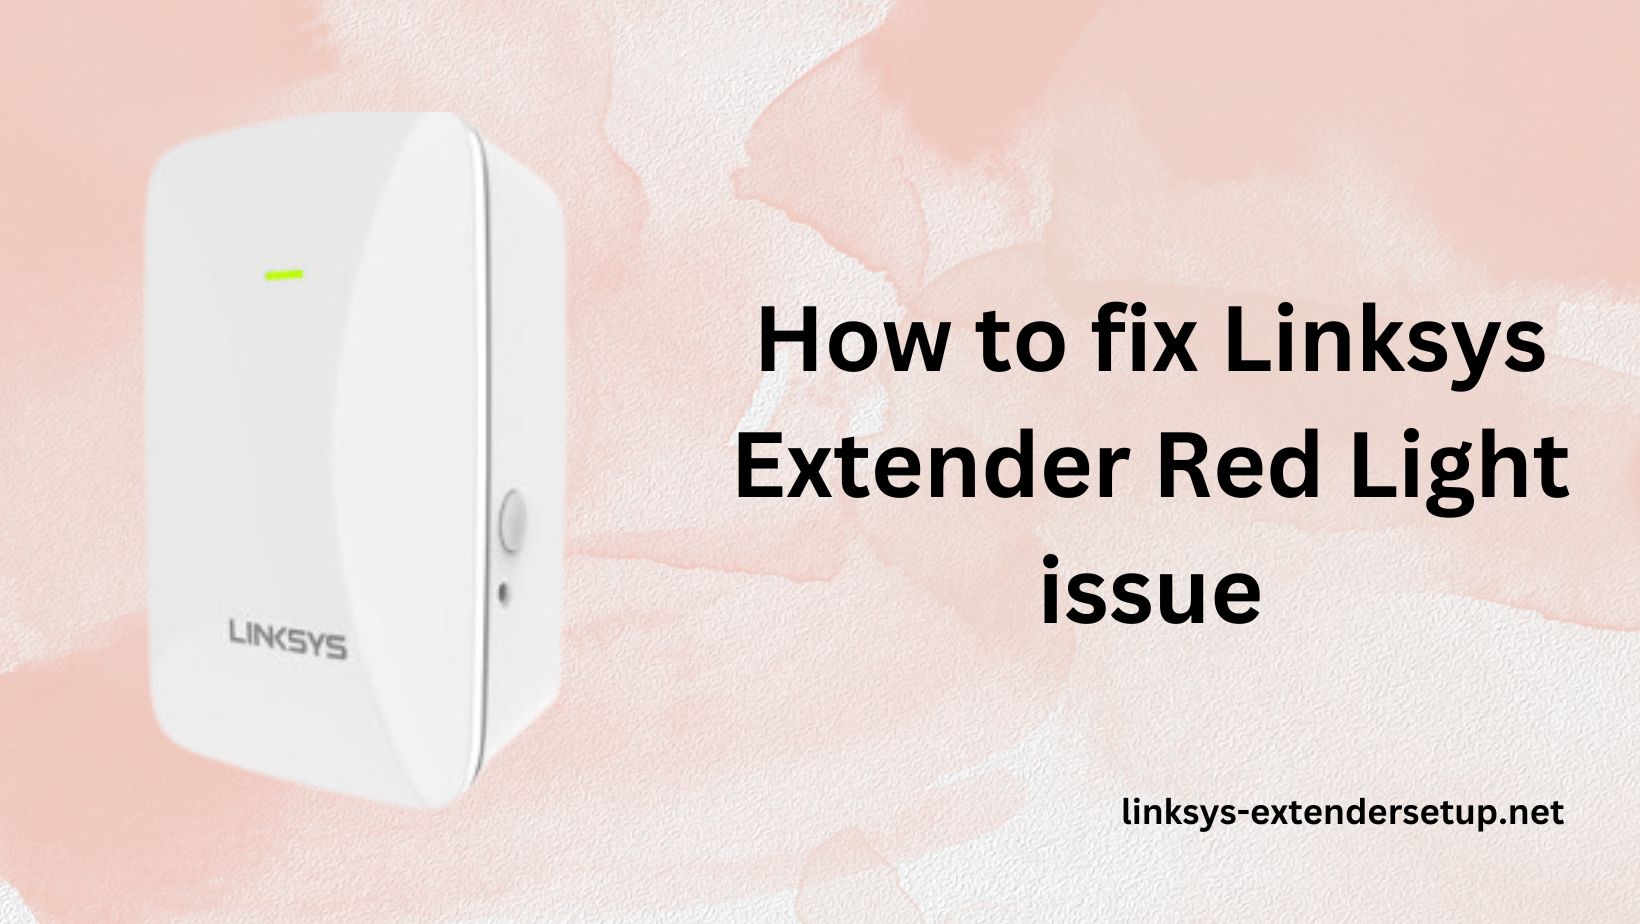 You are currently viewing Fixing Linksys Extender Red Light issue